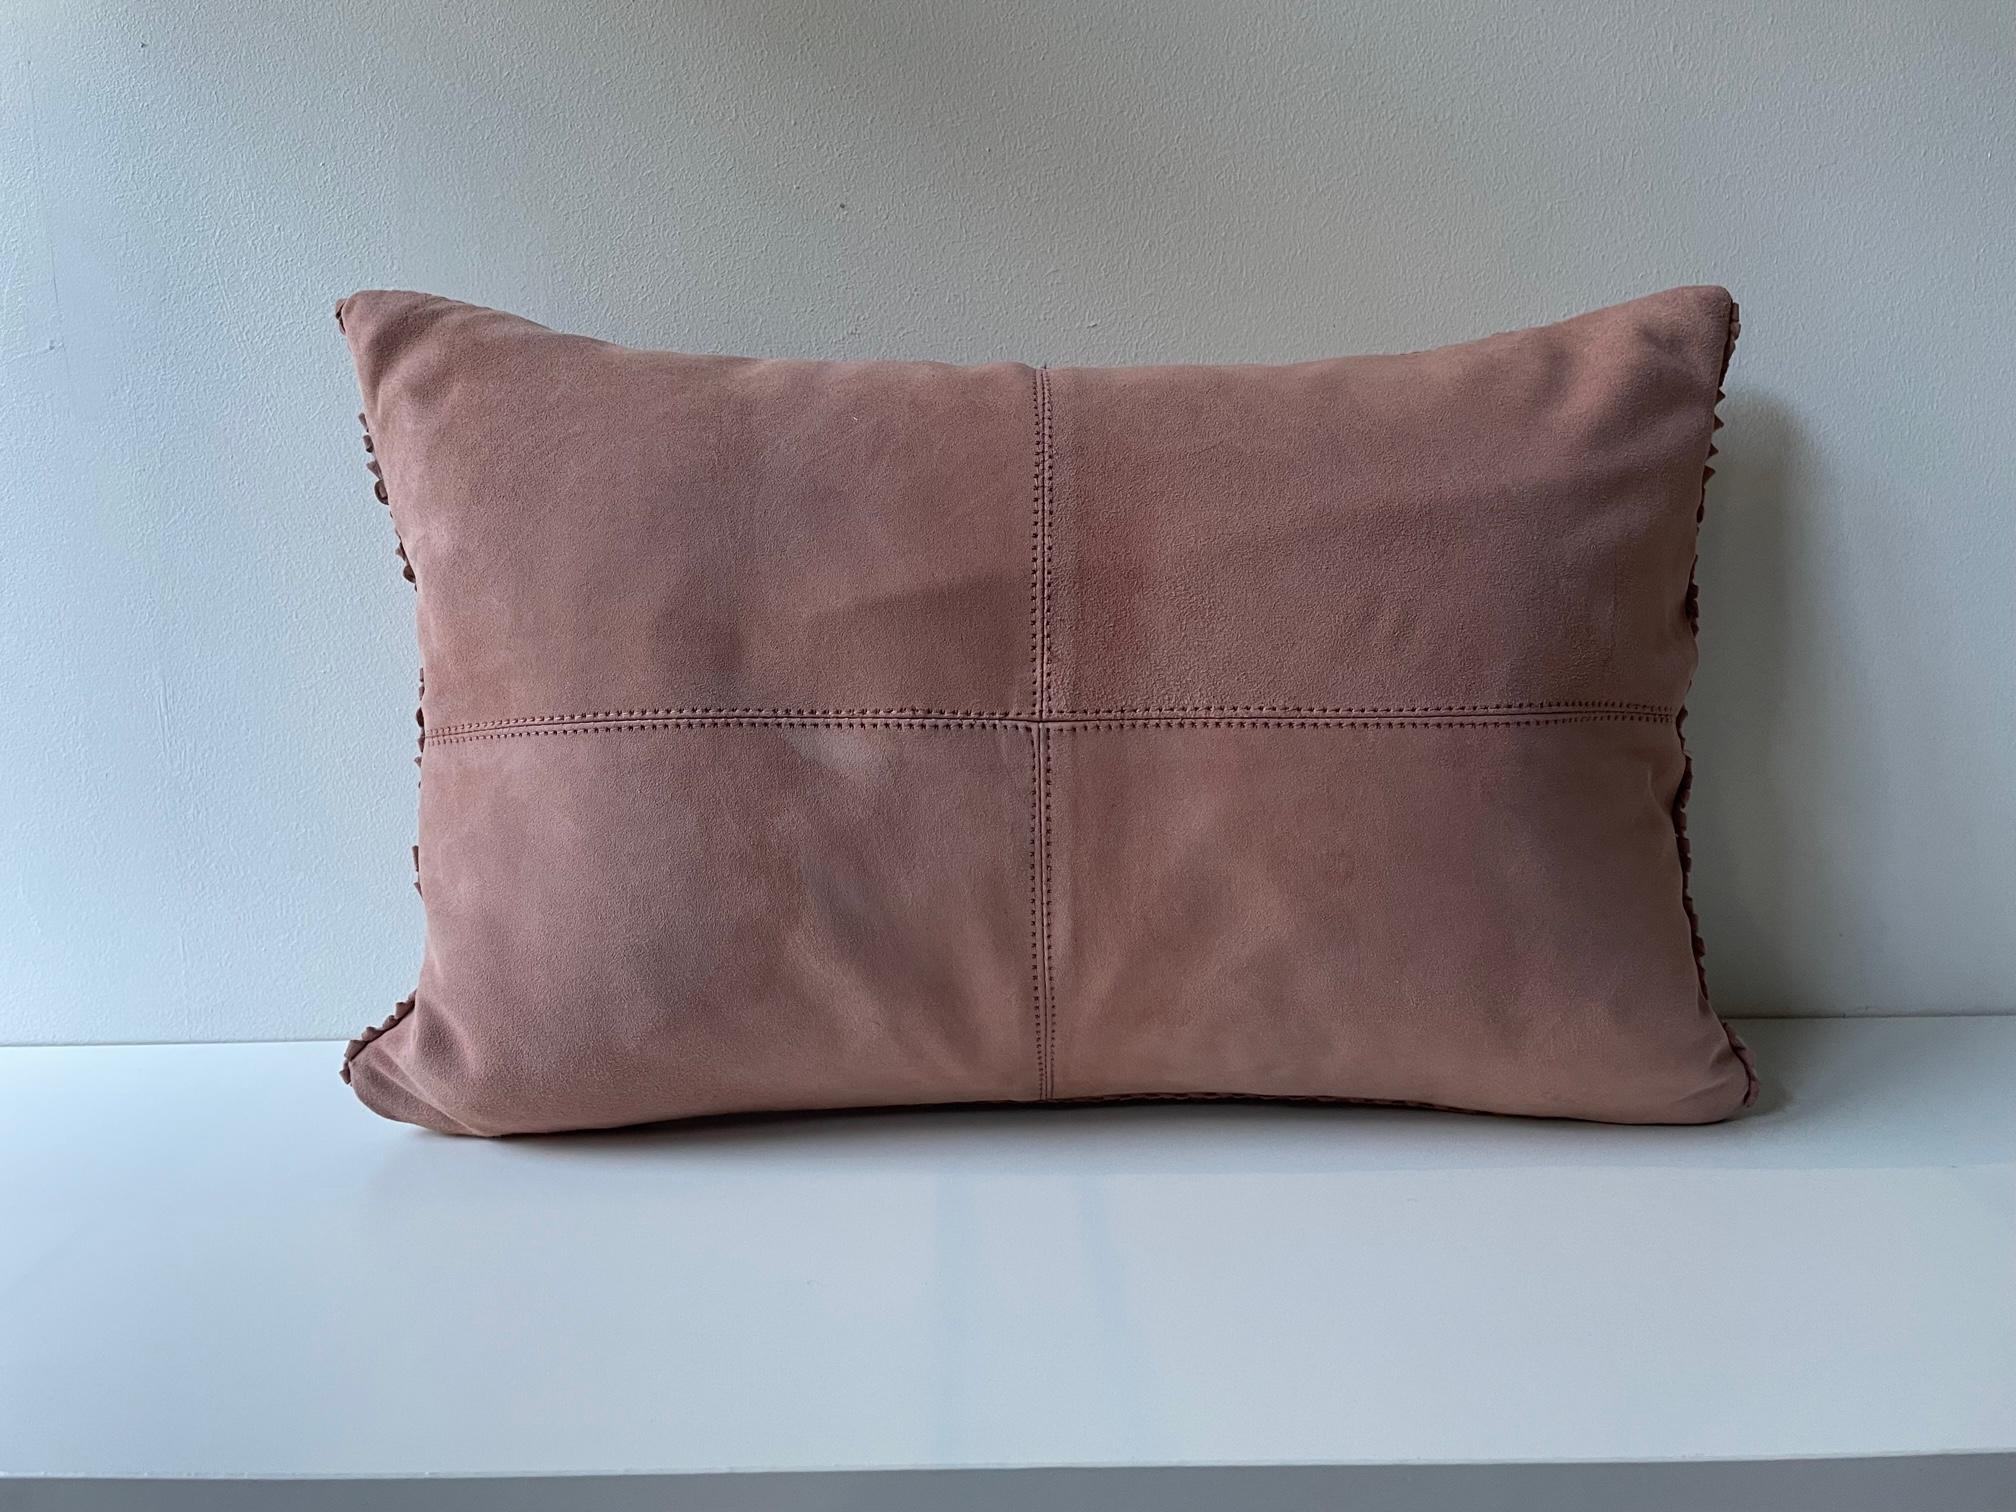 Hand Woven Suede Cushion Colour Old Rose, Back Side with Suede, Cushion size: 30 x 45 cm, silk lining, inner pad with new feathers.